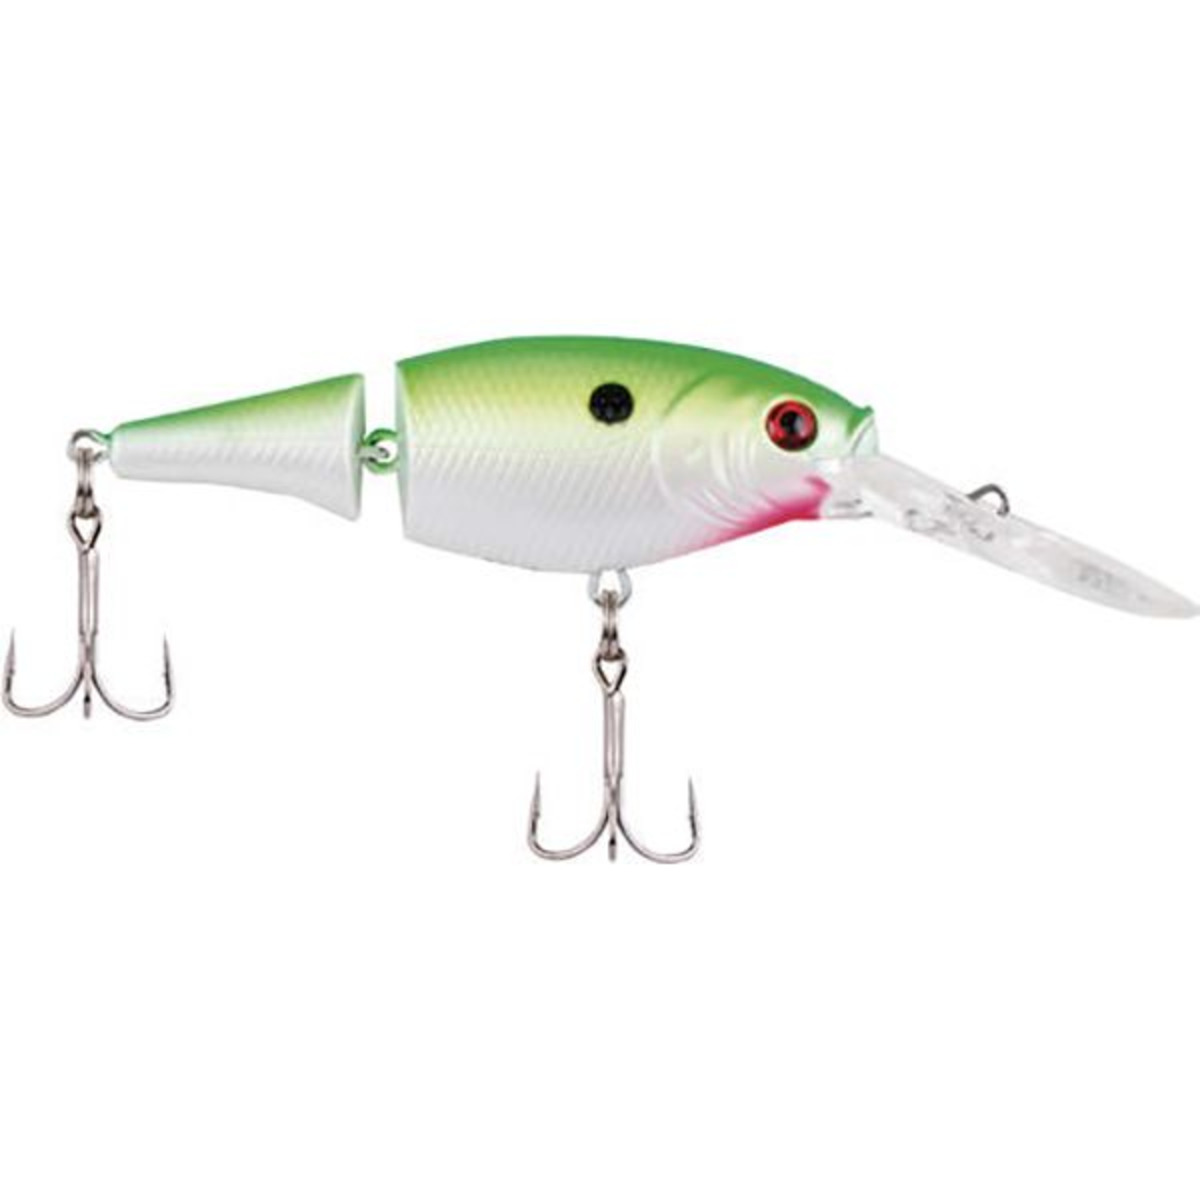 Berkley Flicker Shad Jointed - 7 cm - 8.5 g - Chartreuse Pearl